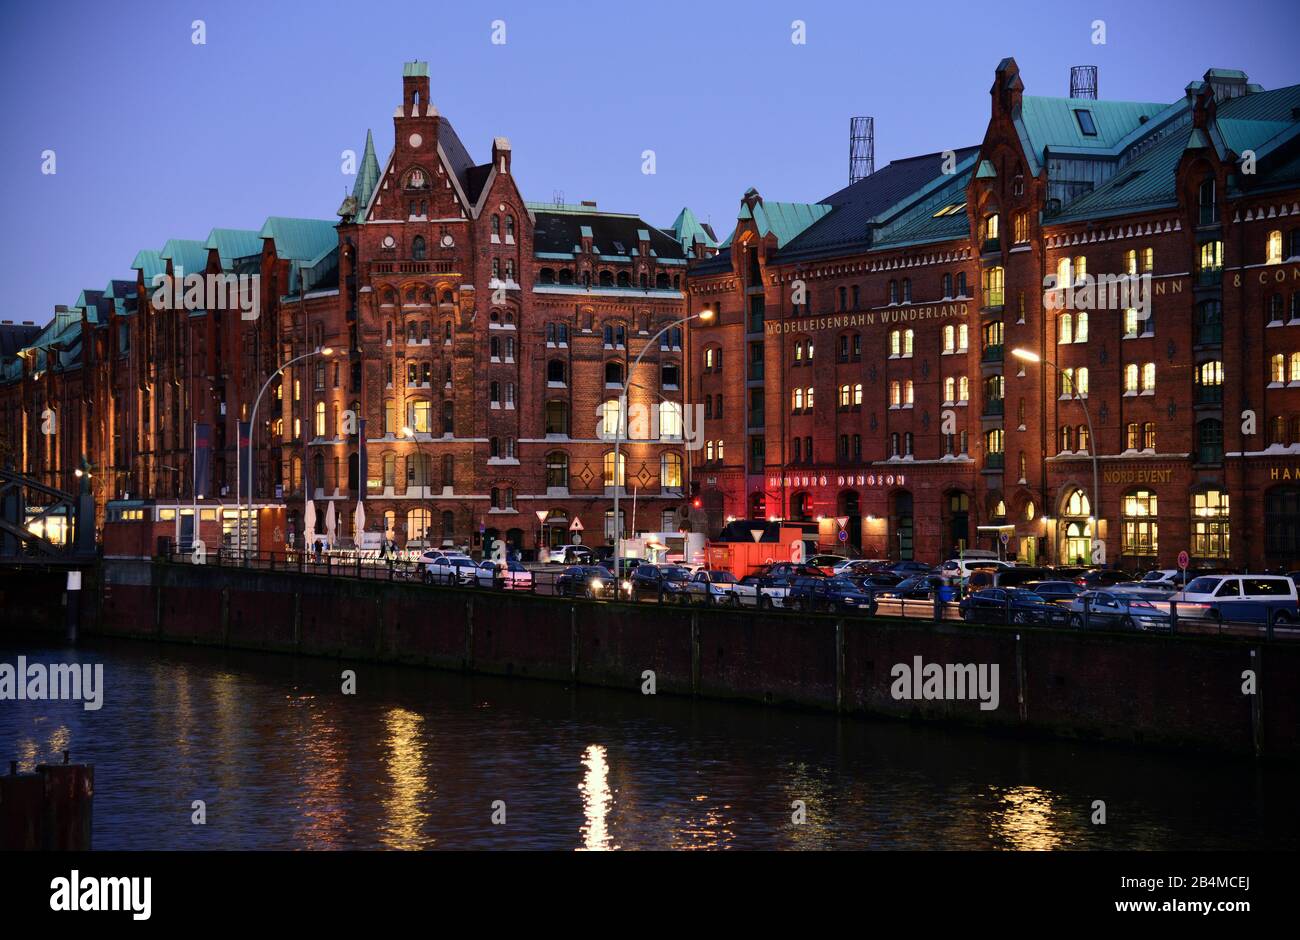 Europe, Germany, Hamburg, historic warehouse district, view from the customs canal to the former brick store, model railway Wunderland, Hamburg dungeon, Stock Photo